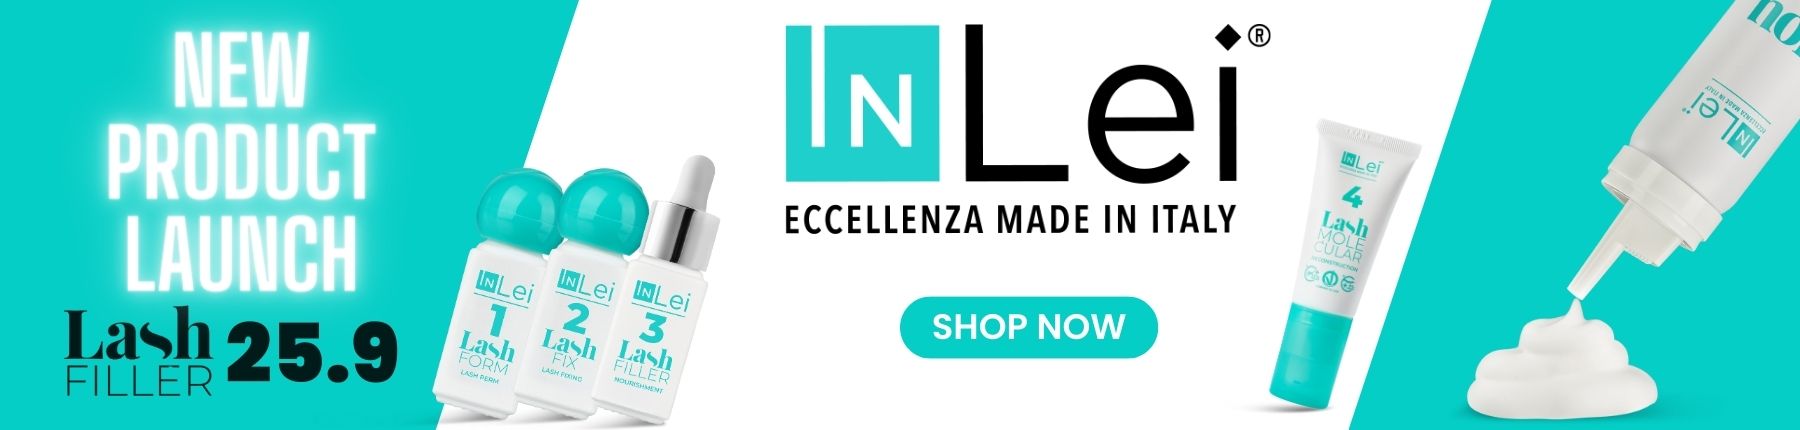 Inlei product launch